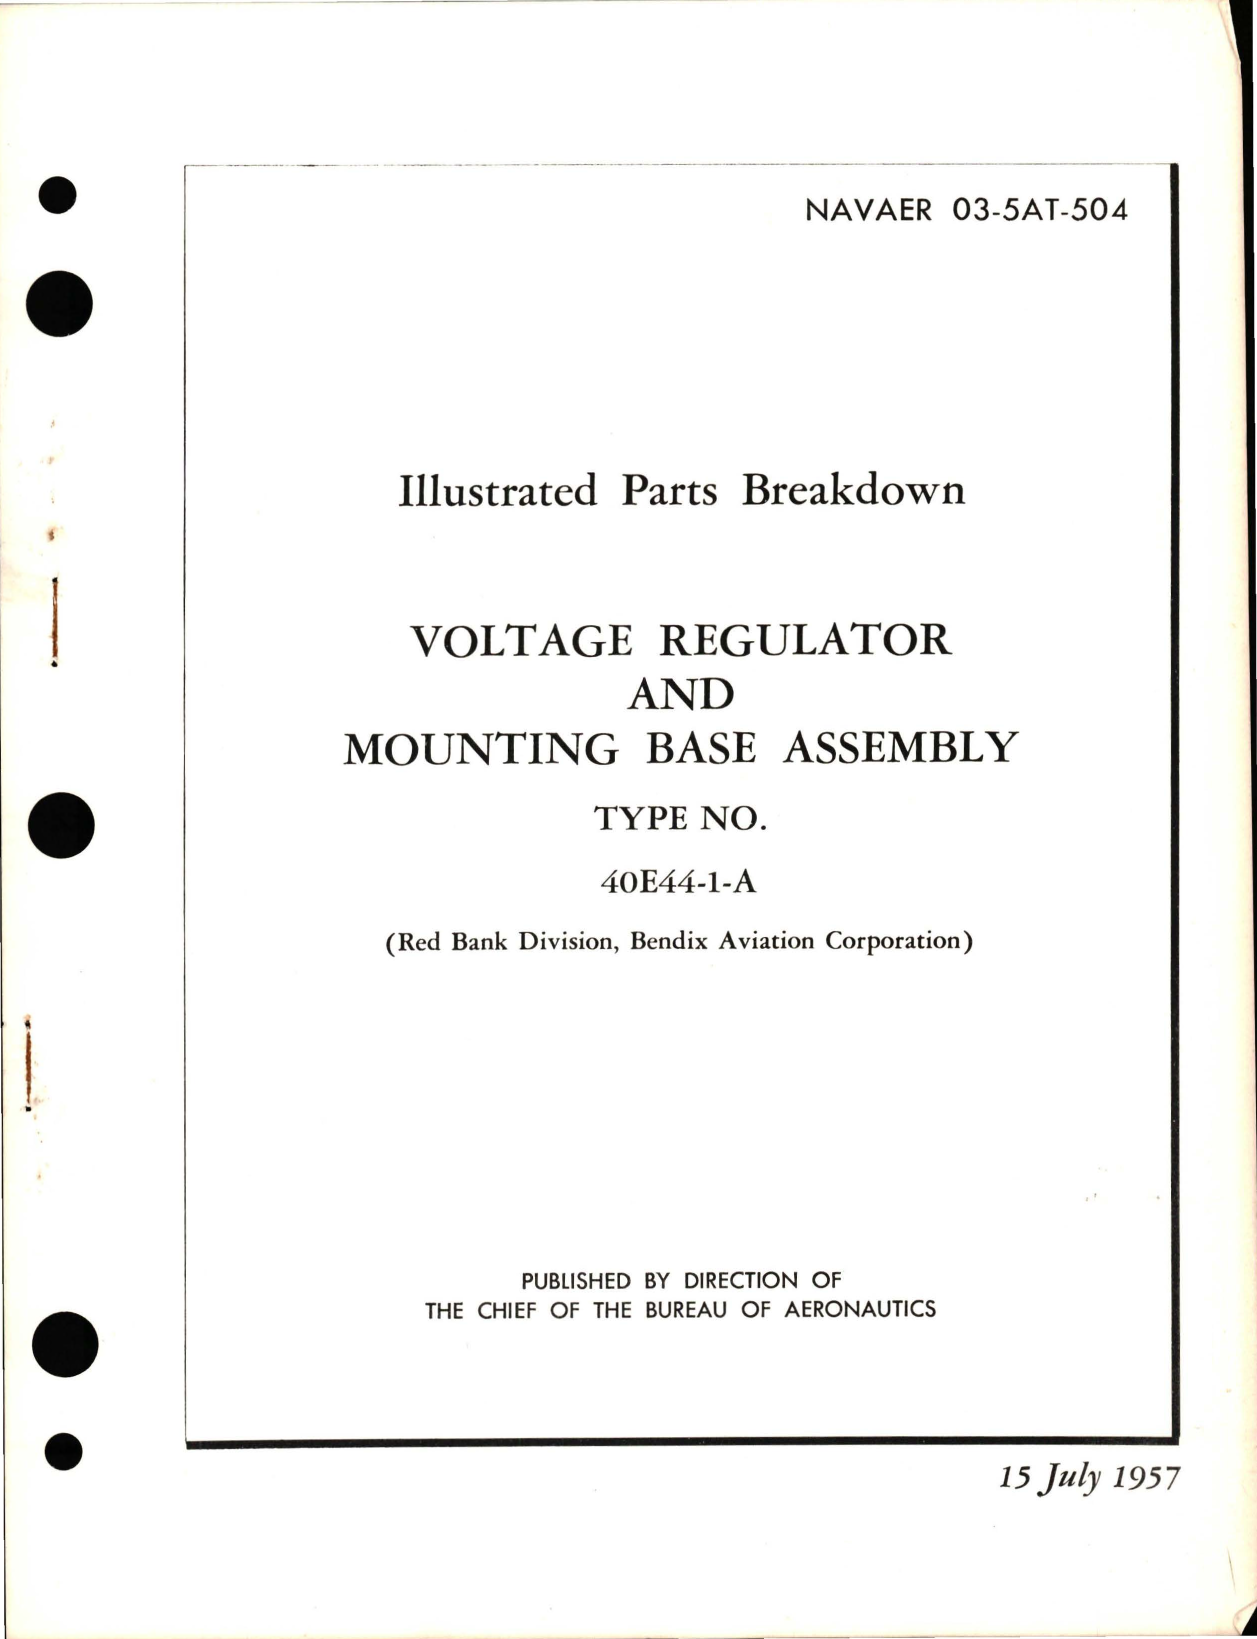 Sample page 1 from AirCorps Library document: Illustrated Parts Breakdown for Voltage Regulator and Mounting Base Assembly - Type 40E44-1-A